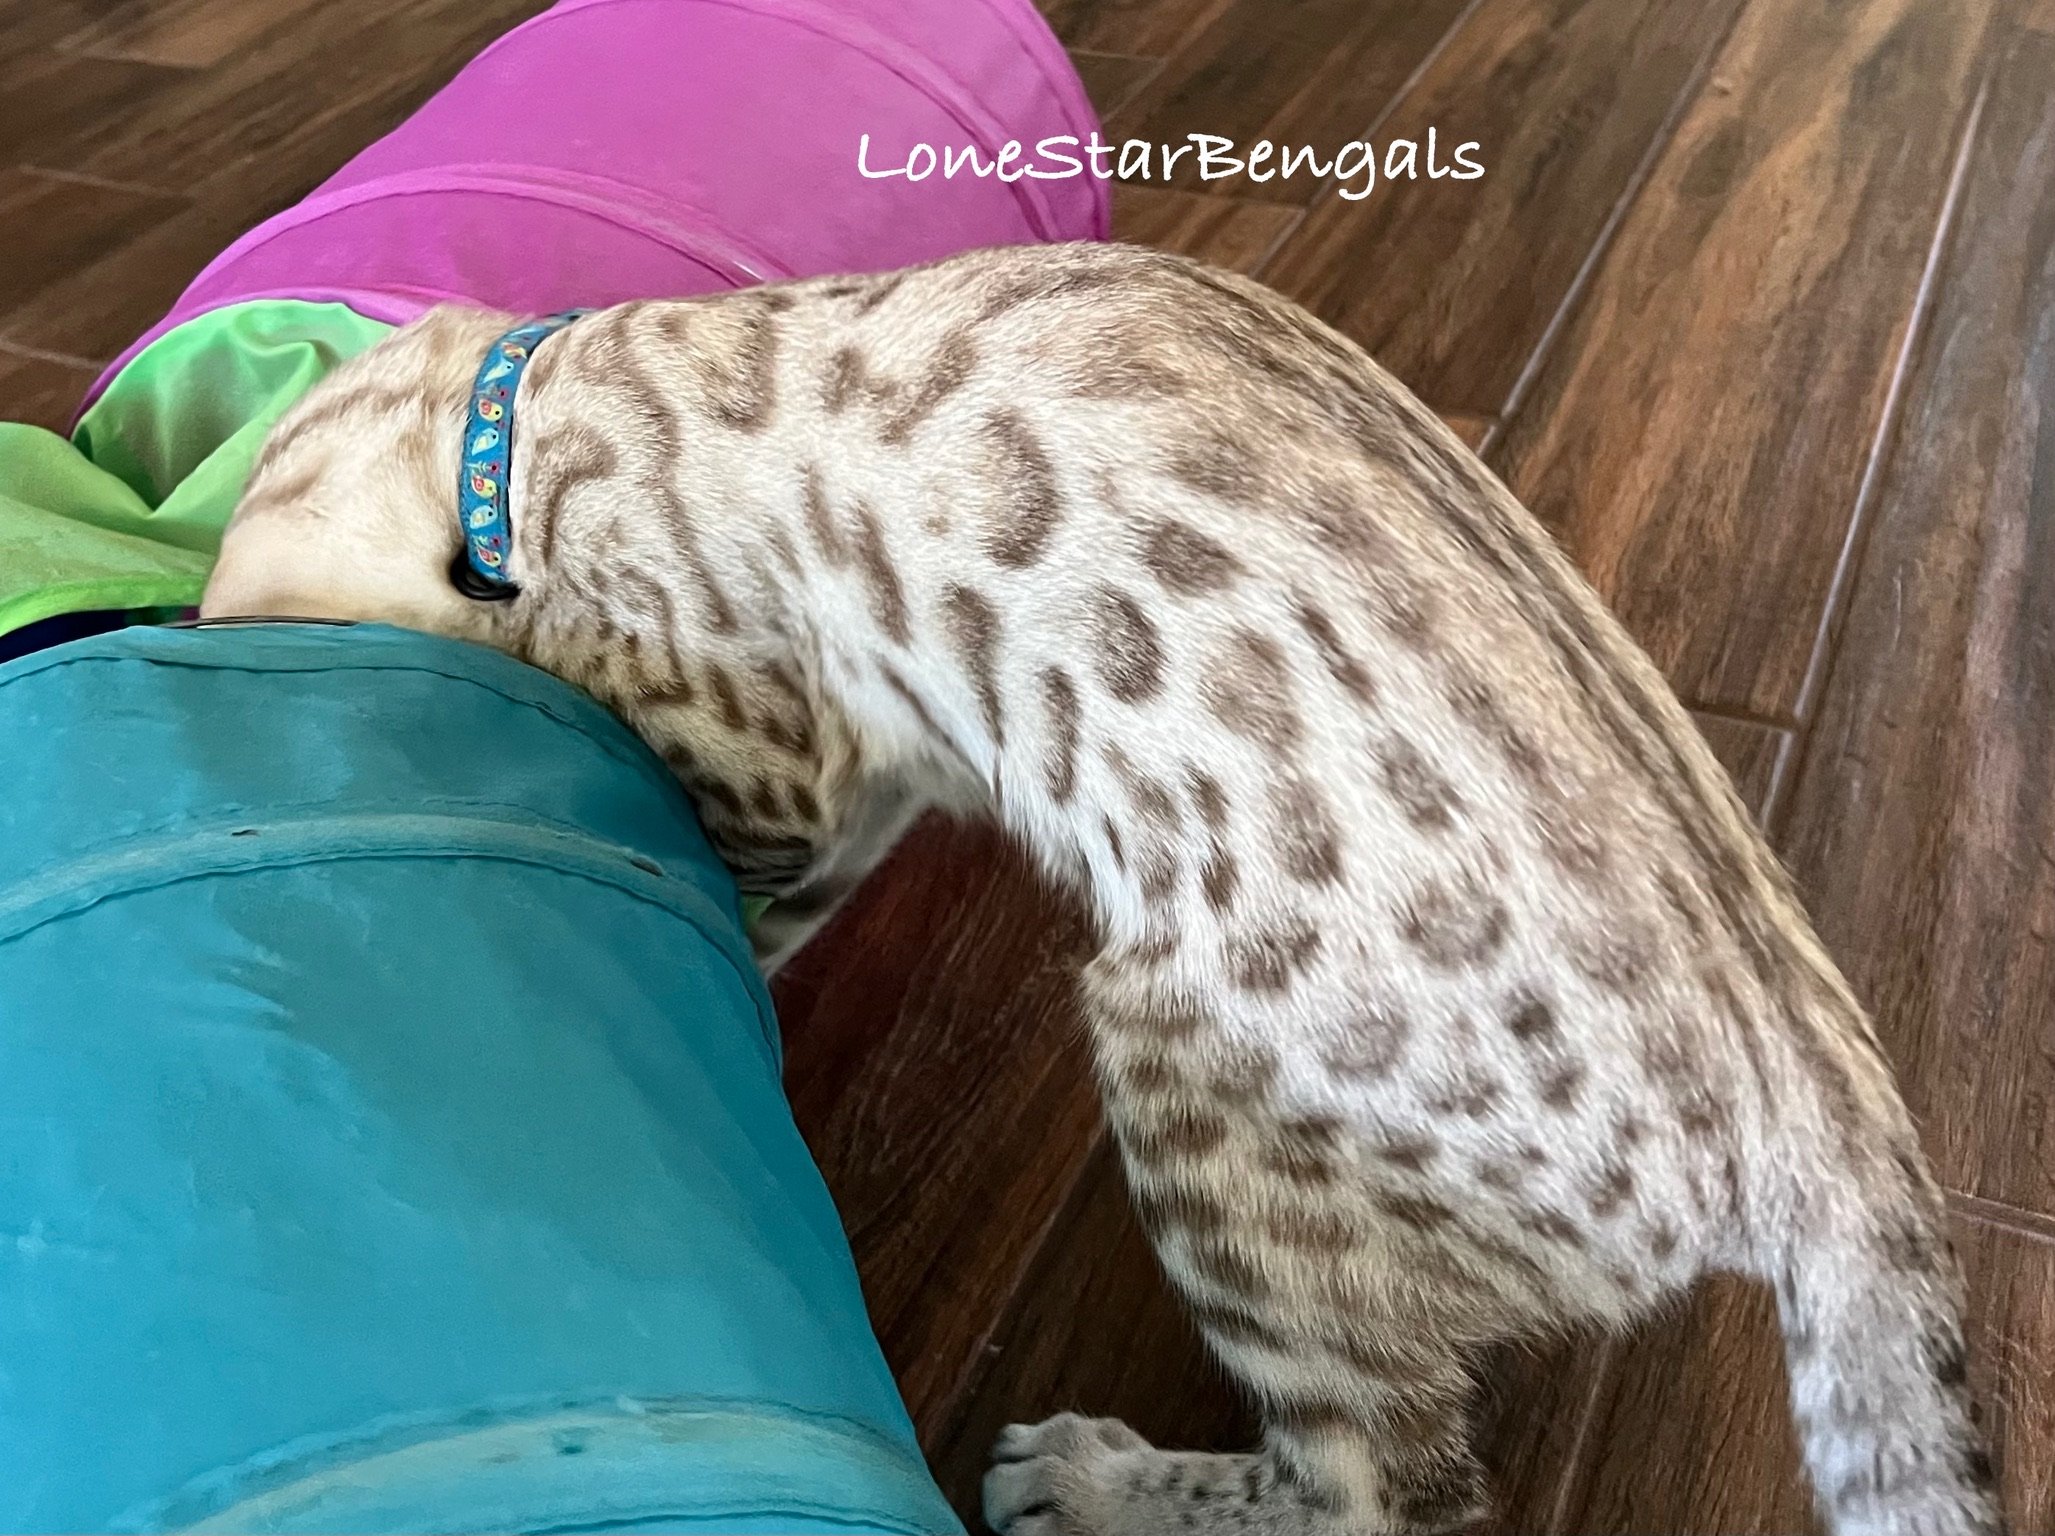 An award-winning Bengal cat, displaying feline passion, happily plays with a colorful tube.